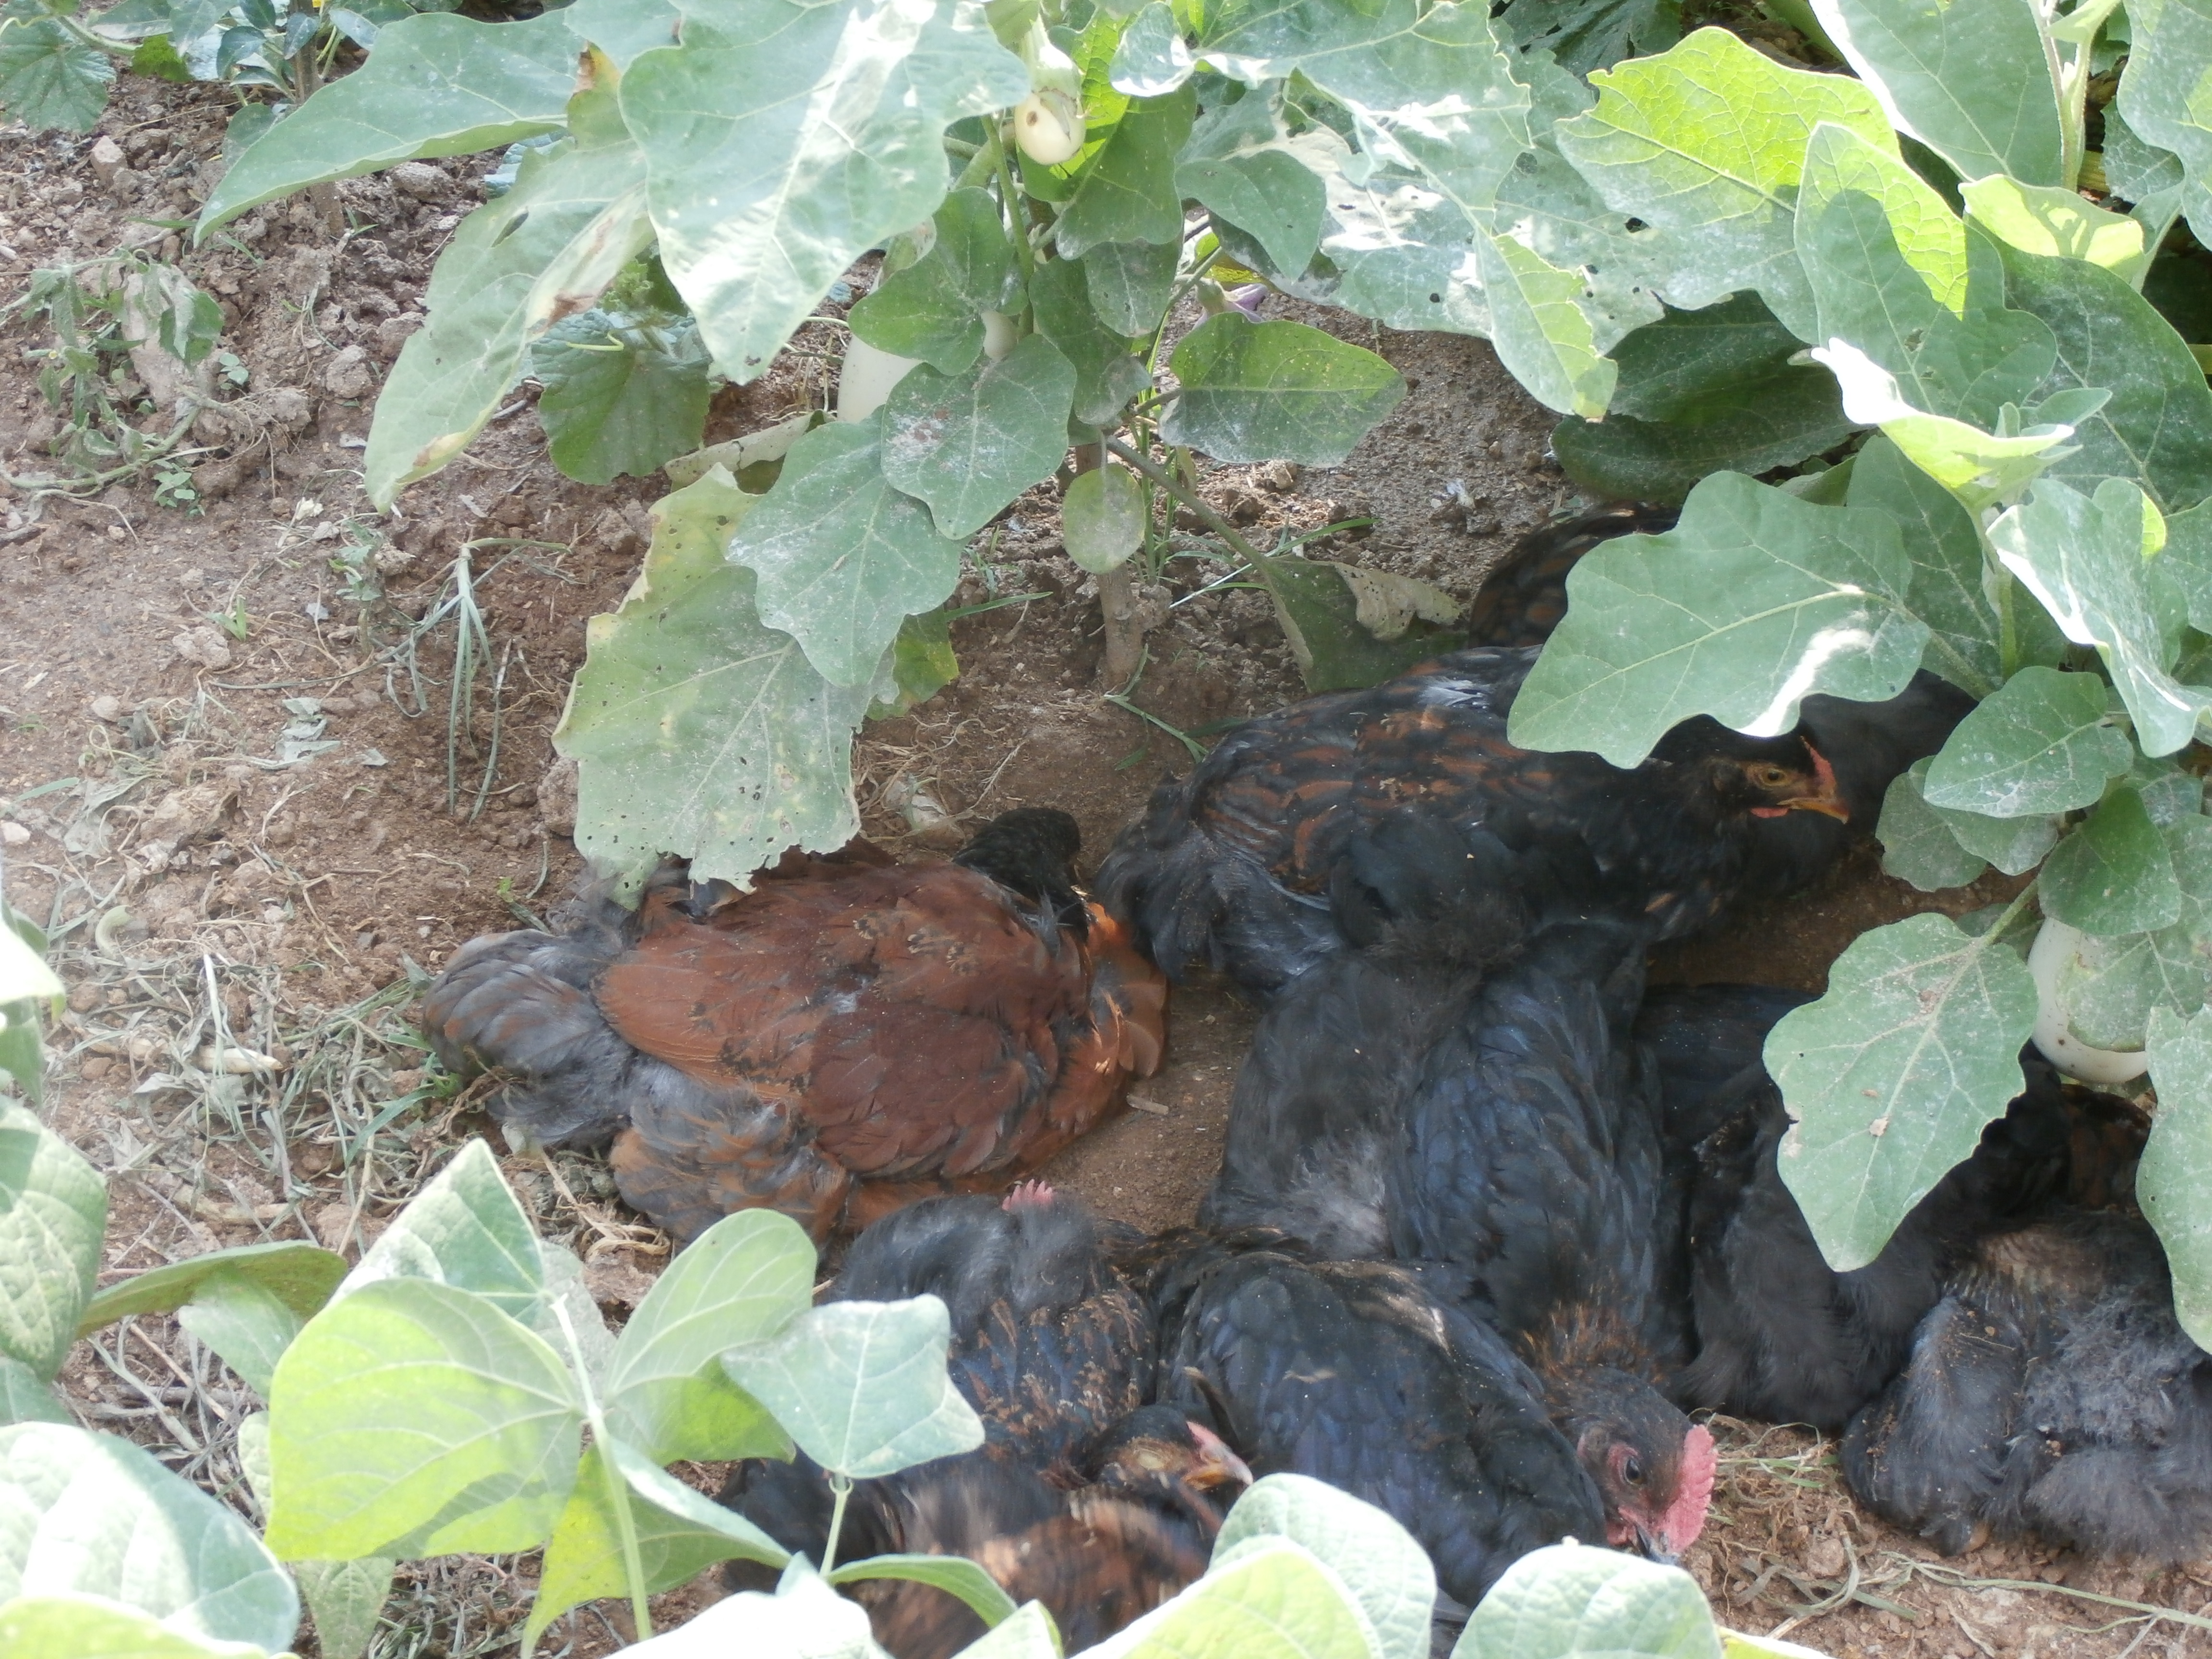 Seeking shade and dust bathing in the garden under the eggplants.